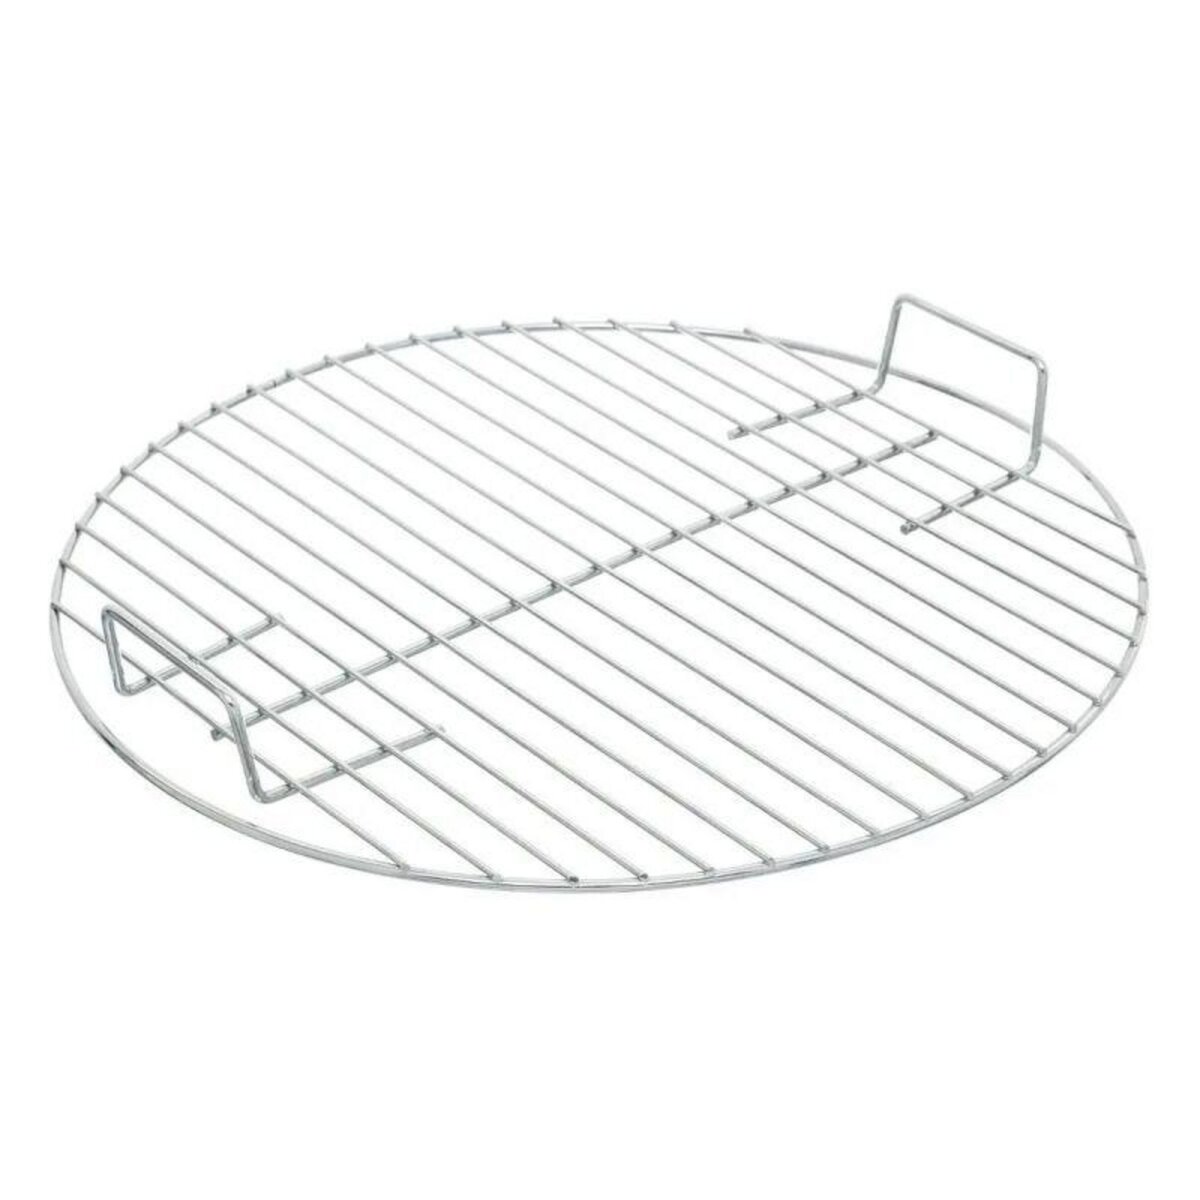  Grille Barbecue  Neka  43cm Argent